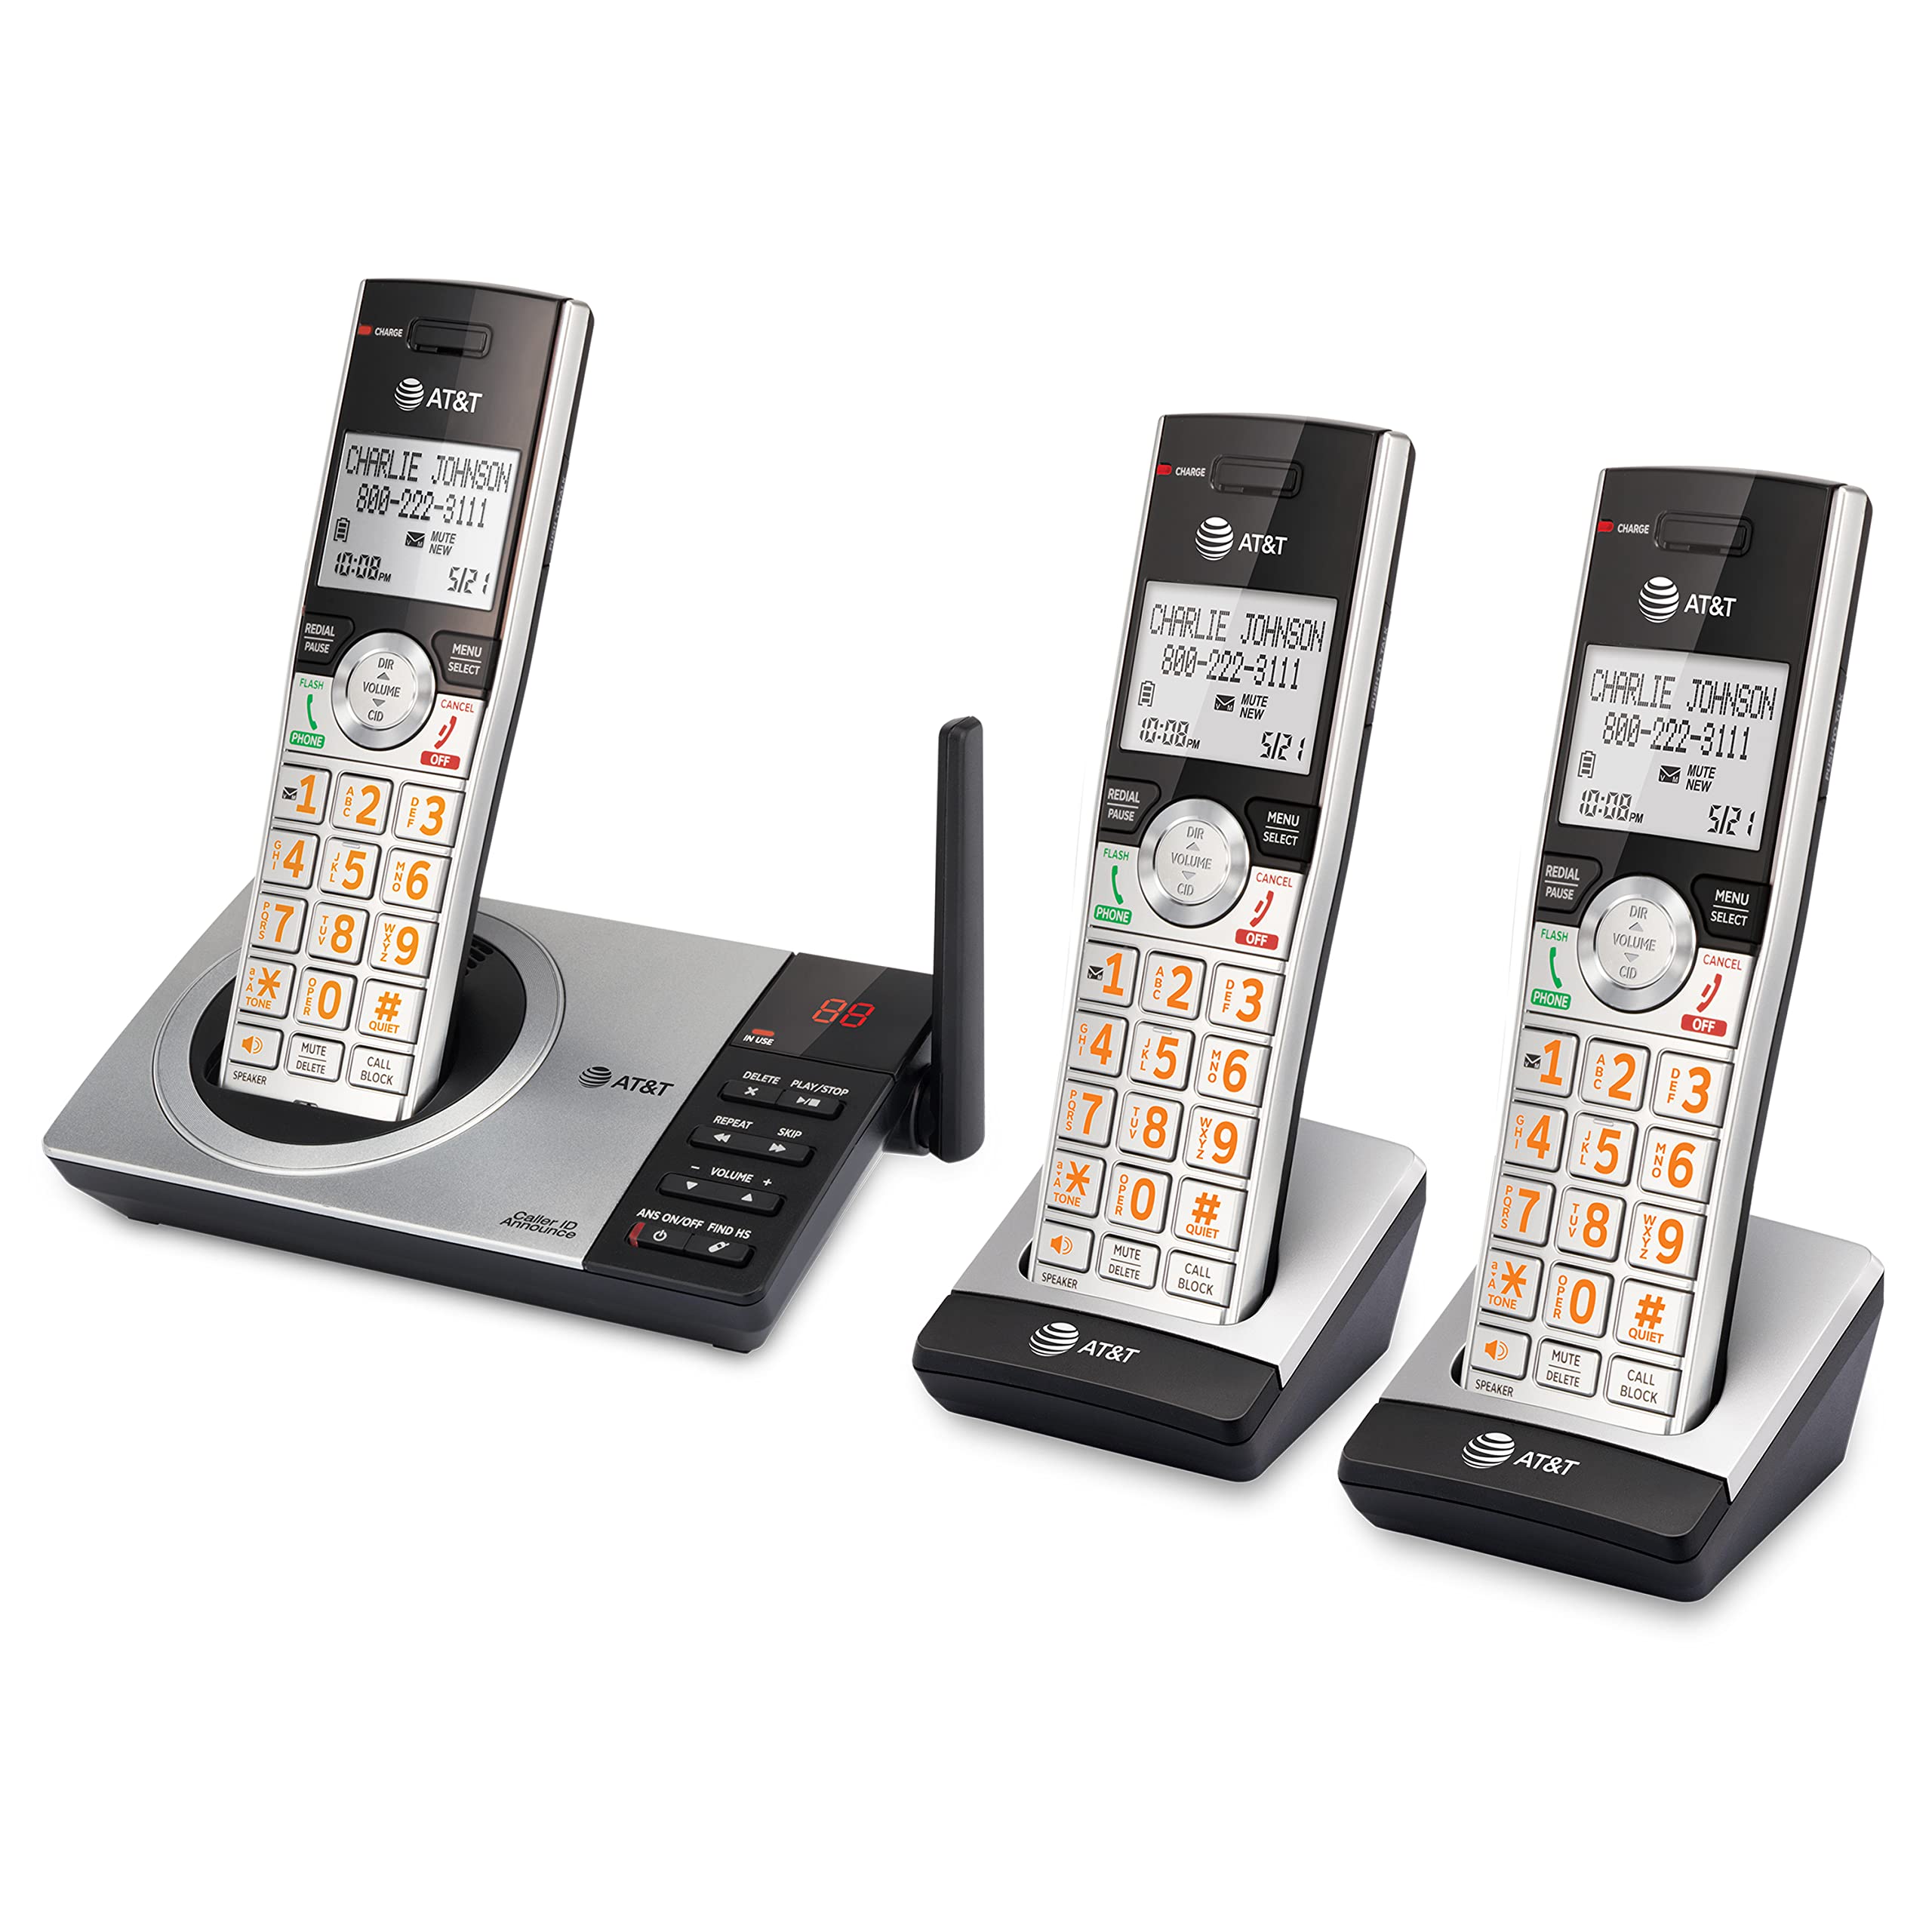 AT&T DECT 6.0 Expandable Cordless Phone with Answering System, Silver/Black with 3 Handsets